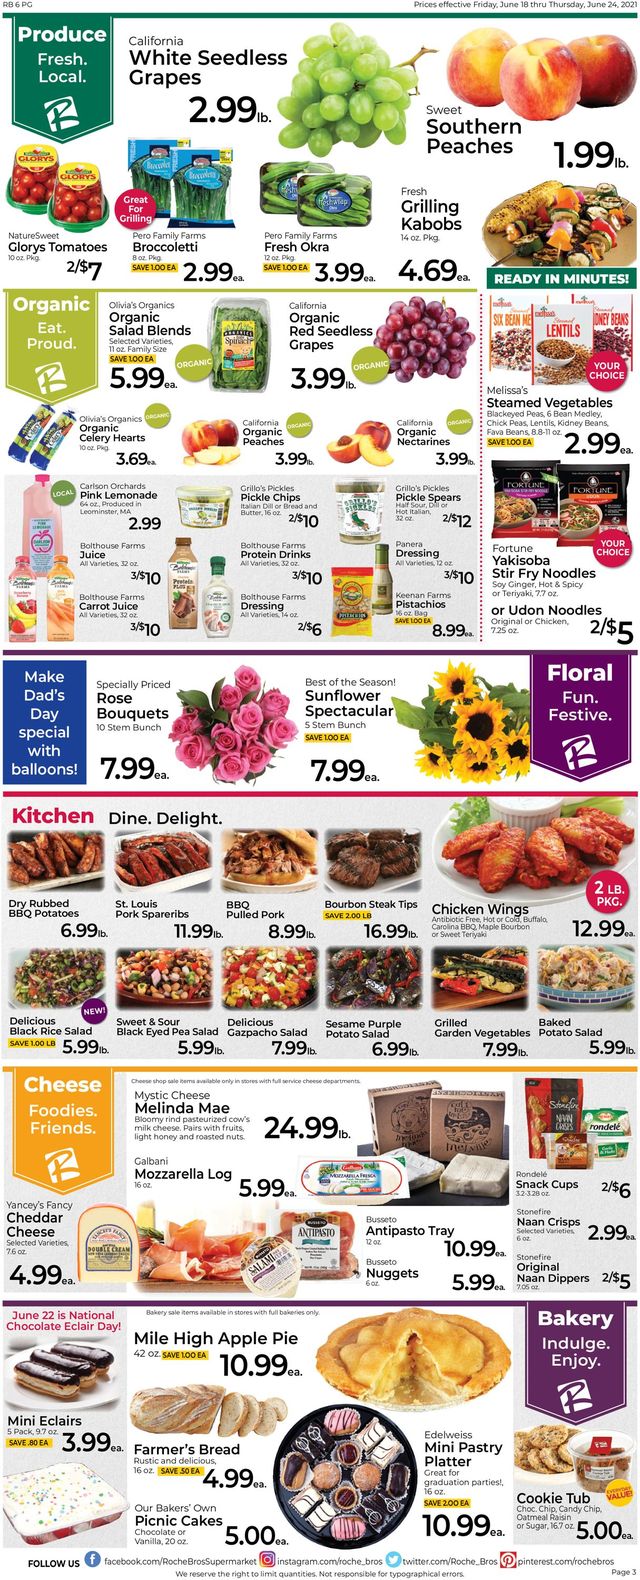 Roche Bros. Supermarkets Ad from 06/18/2021